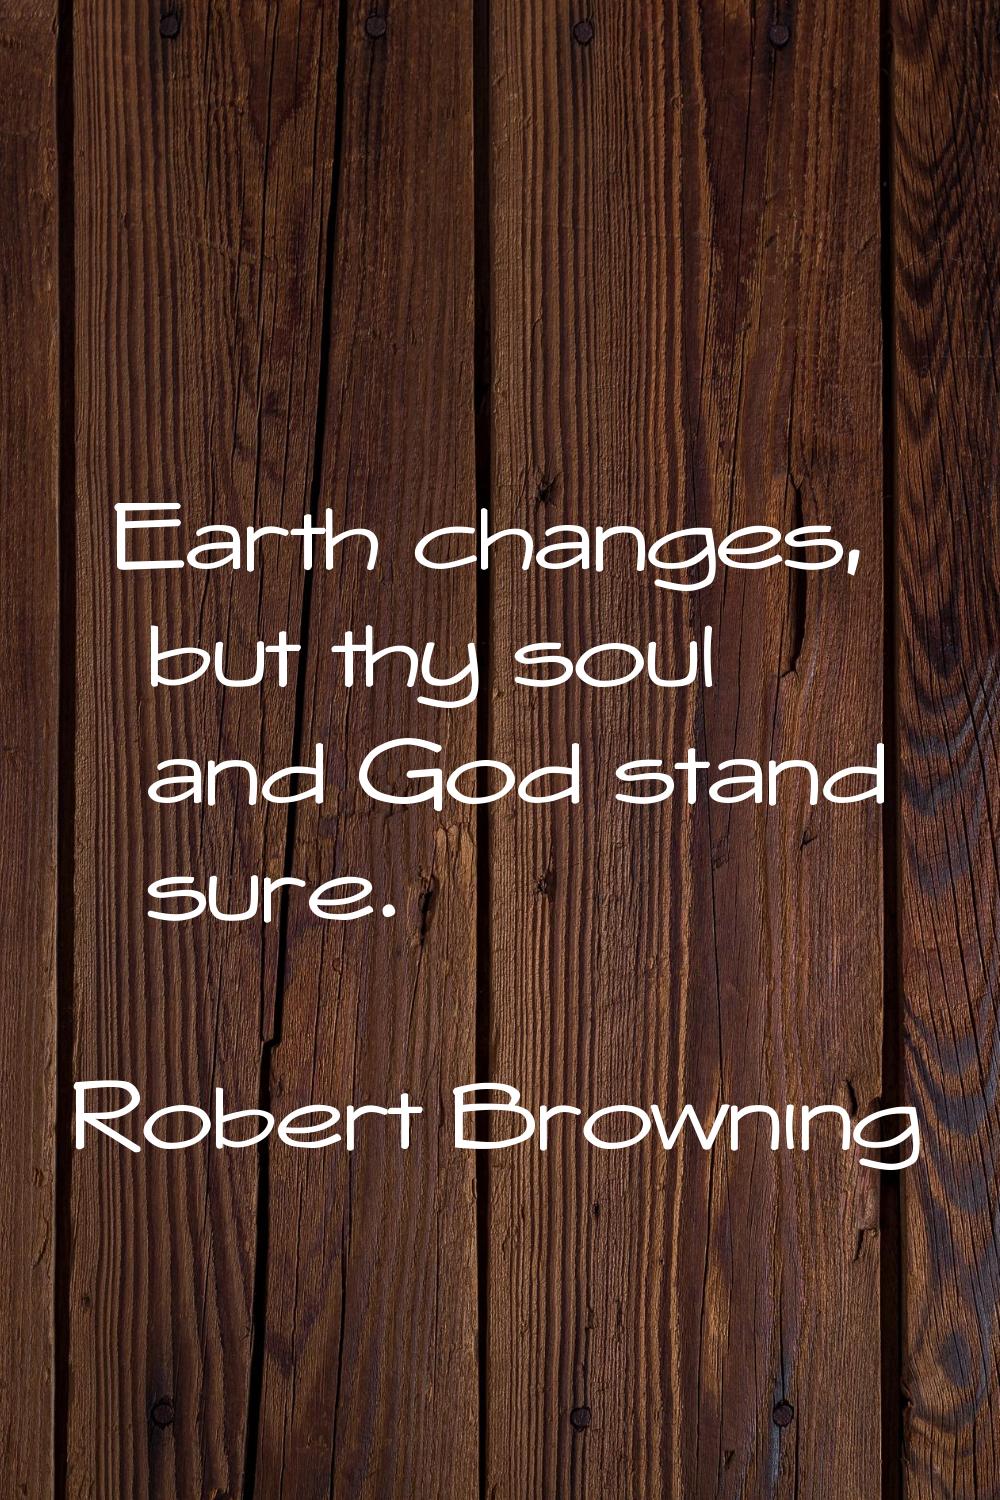 Earth changes, but thy soul and God stand sure.